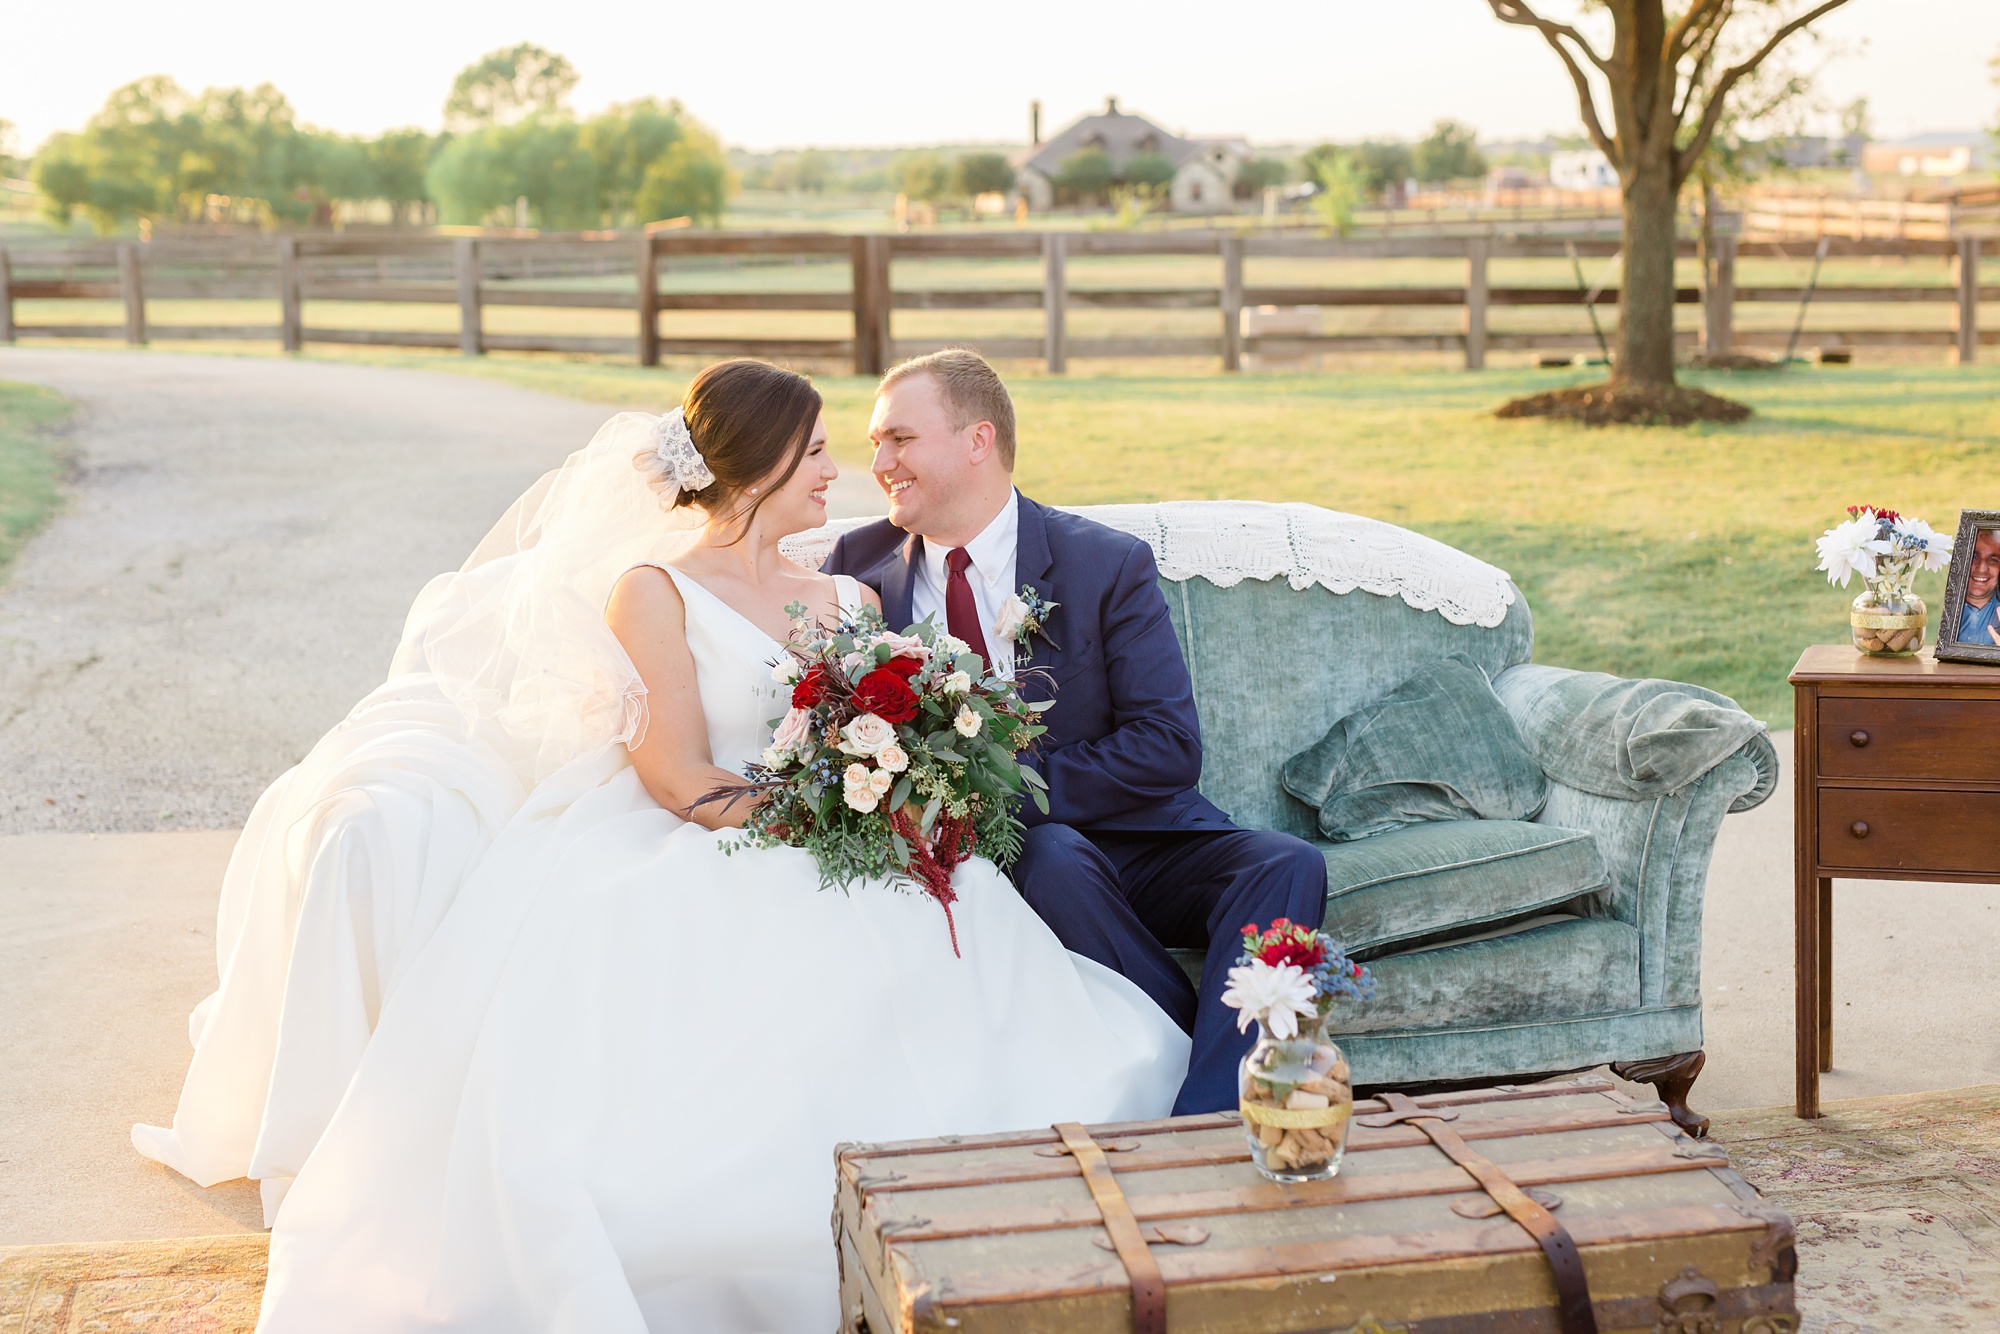 newlyweds sit on couch during Texas wedding reception